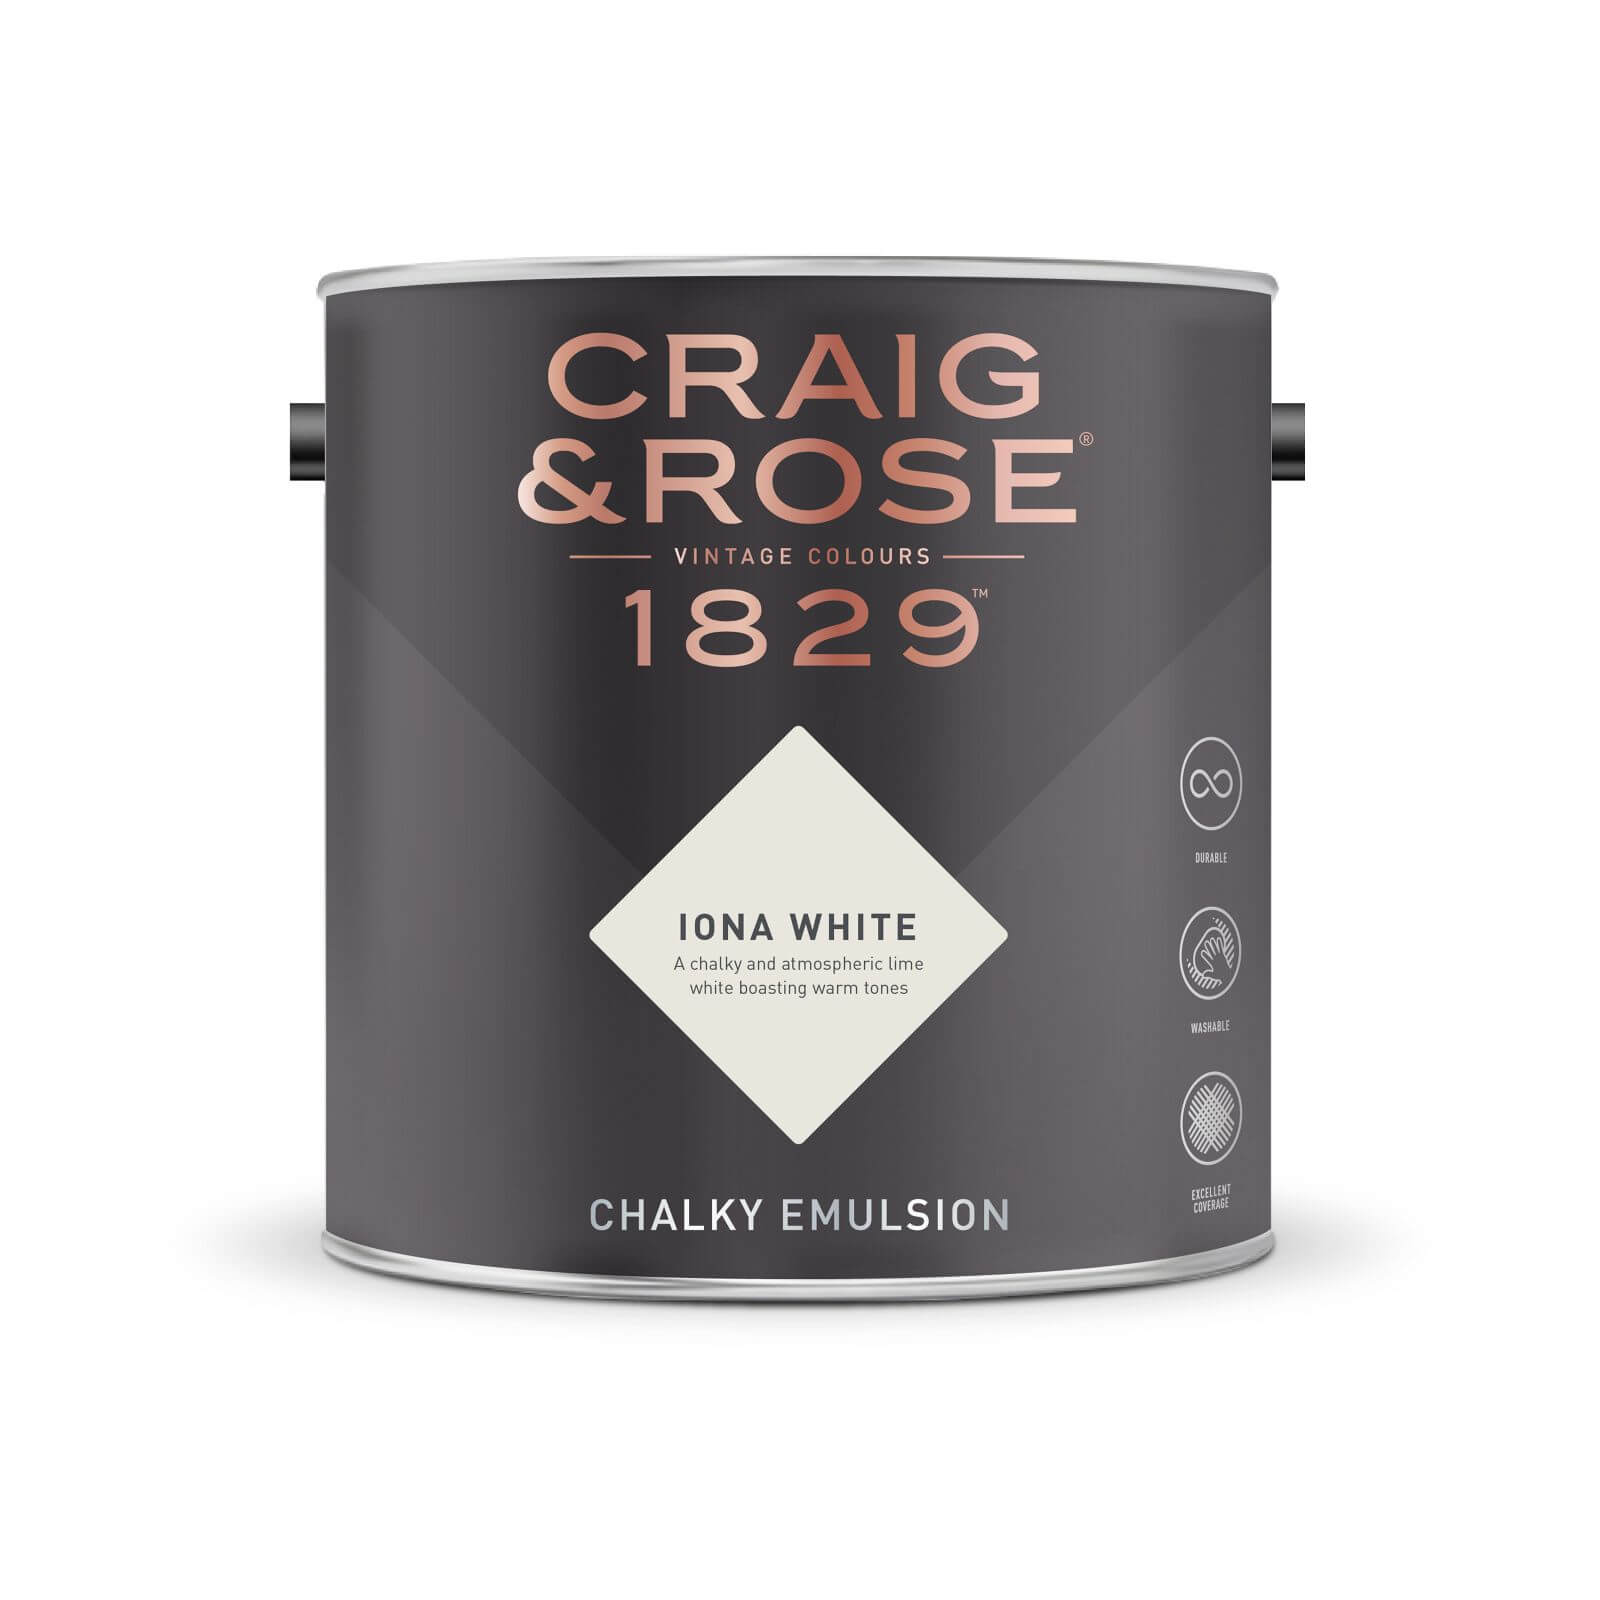 Craig & Rose 1829 Chalky Emulsion Paint Iona White - Tester 50ml